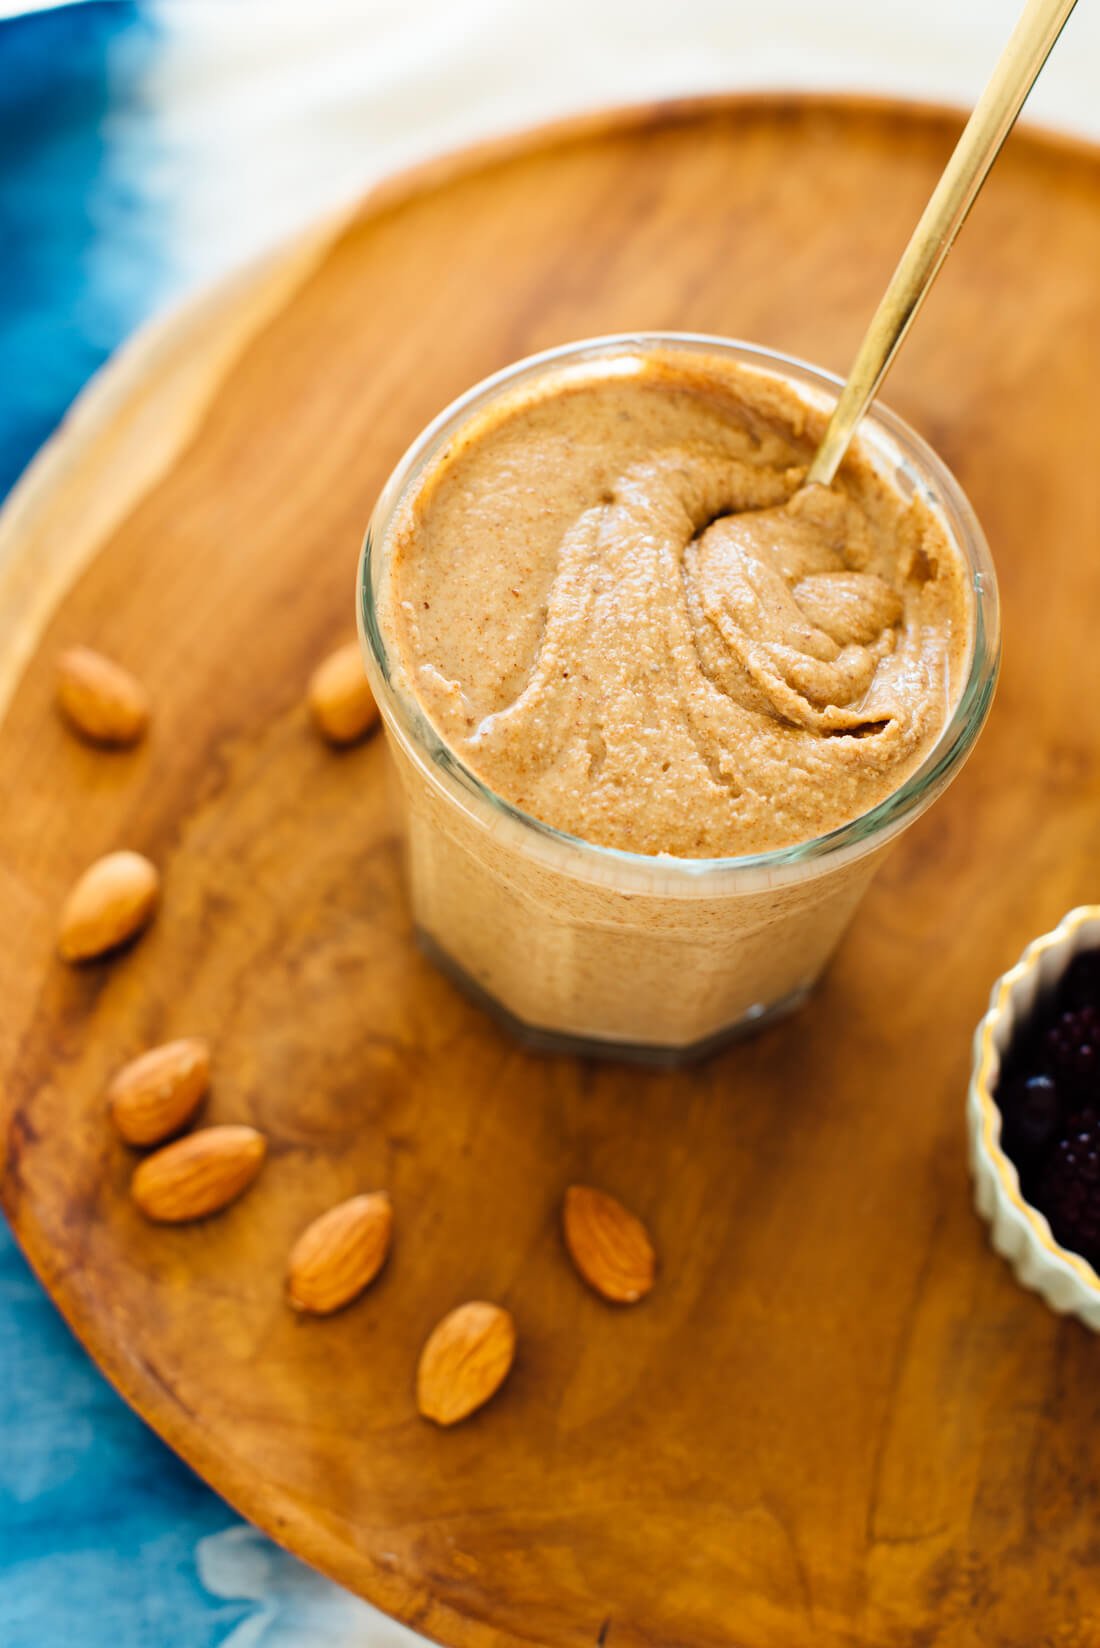 How To Make A Pure Almond Butter? 